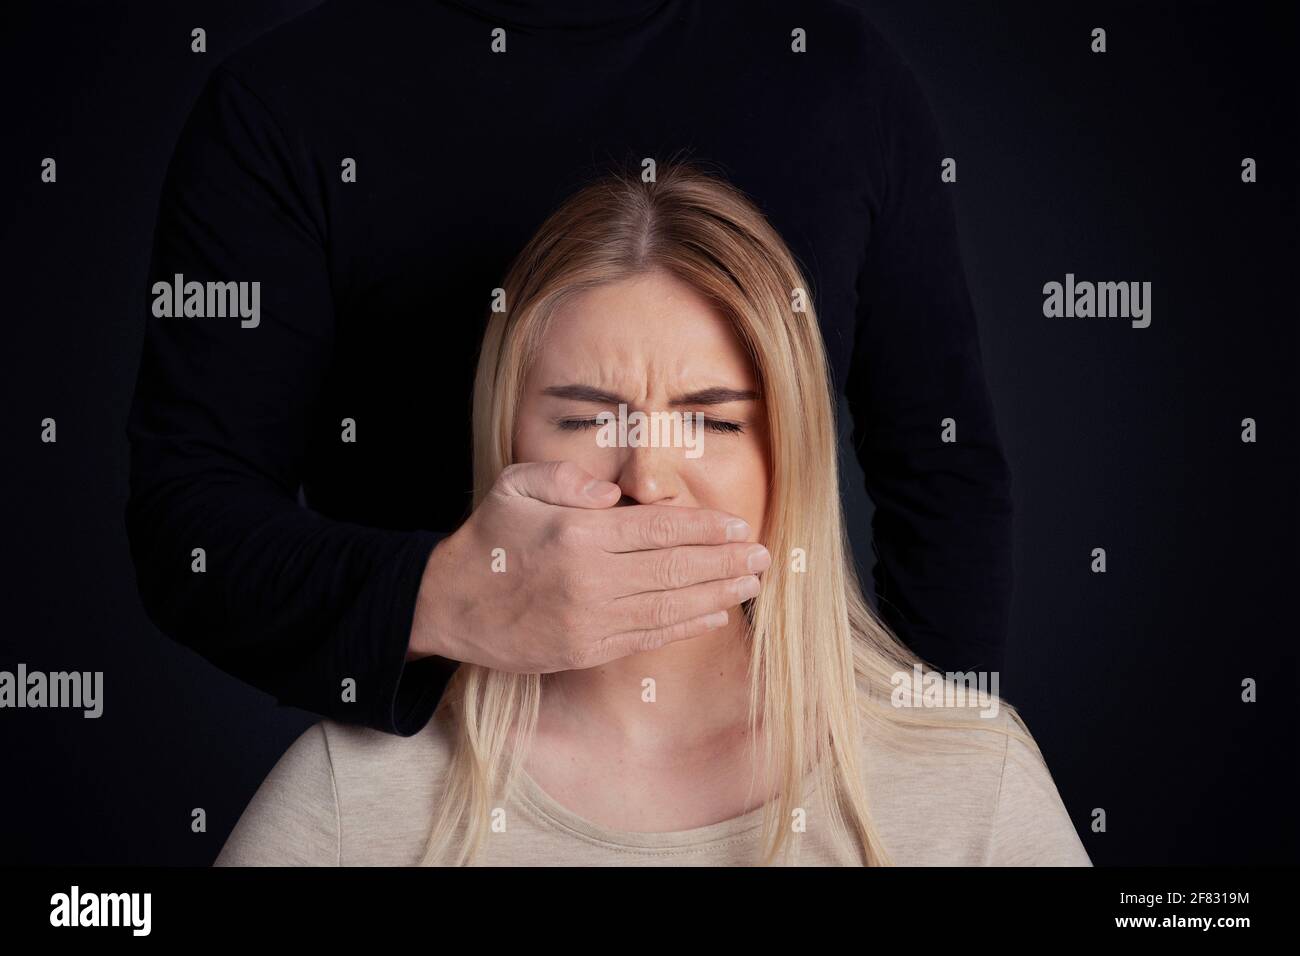 Fear, tyrant, ageism and abused. Male aggressive in black clothes covers mouth with hand of scared young lady Stock Photo